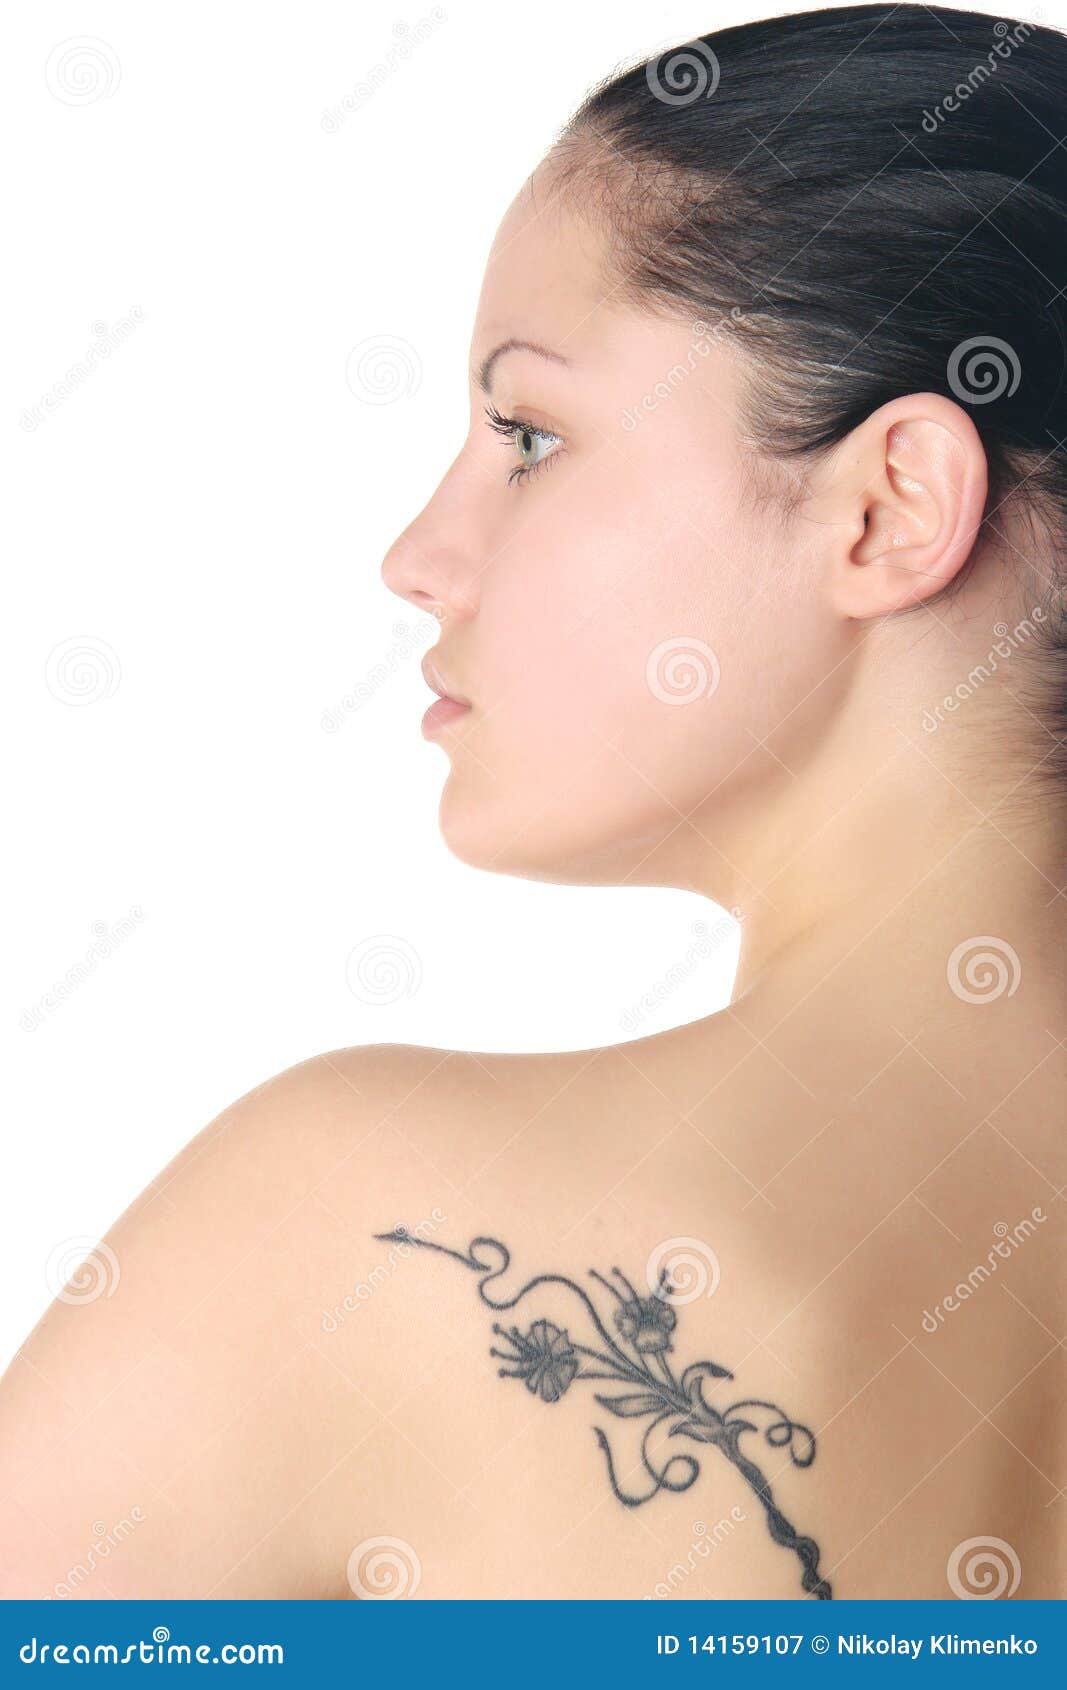 Portrait woman with tattoo stock image. Image of figure - 14159107